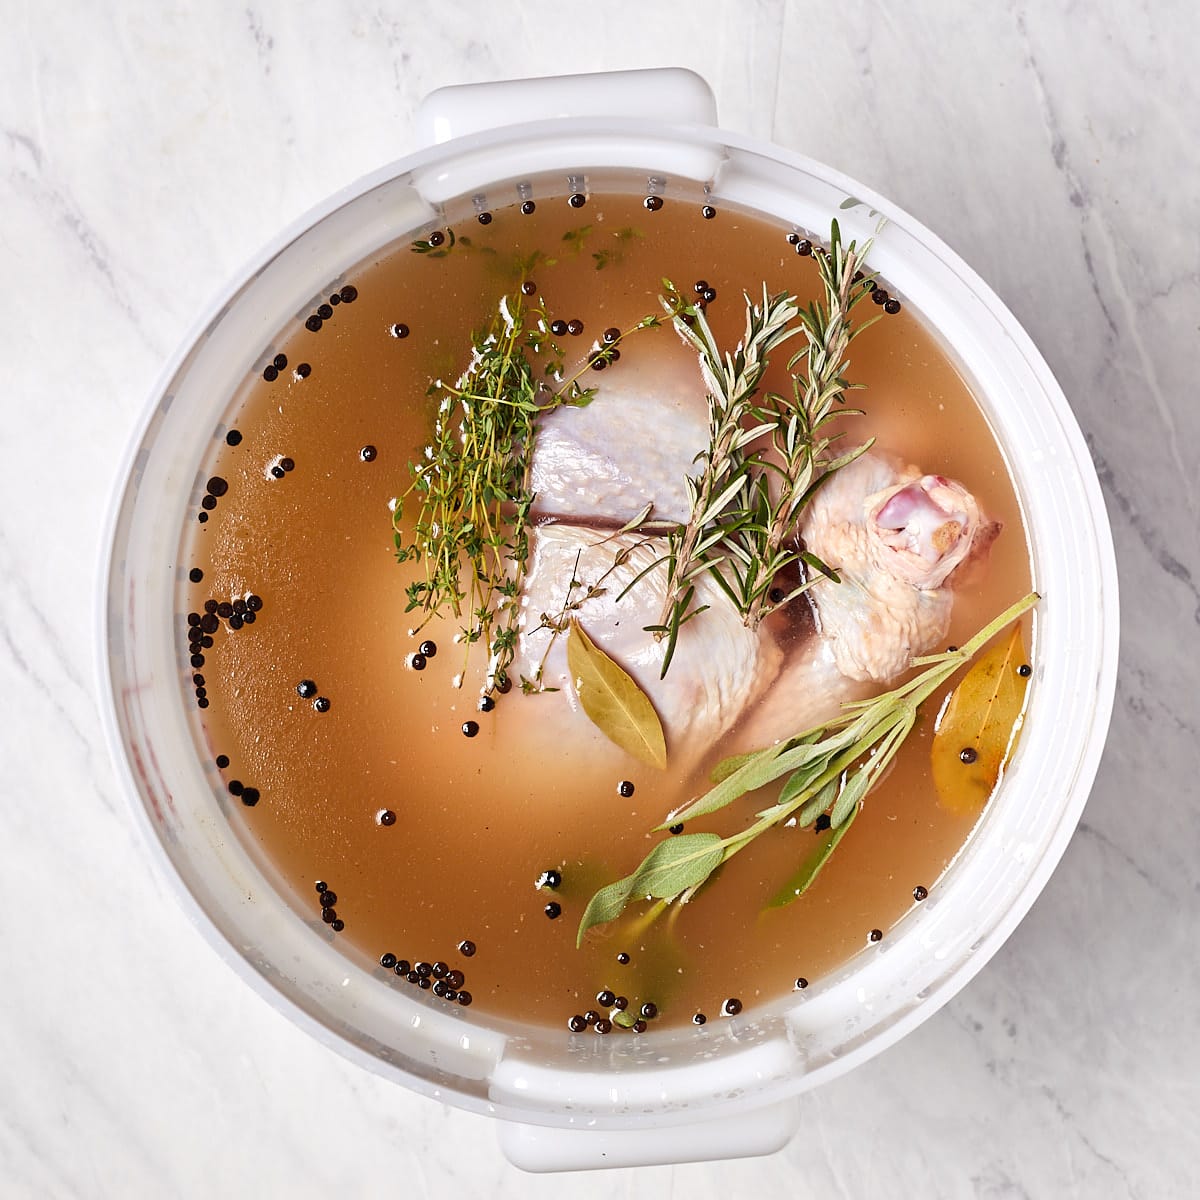 raw turkey in a food grade bucket with the brine and herbs.